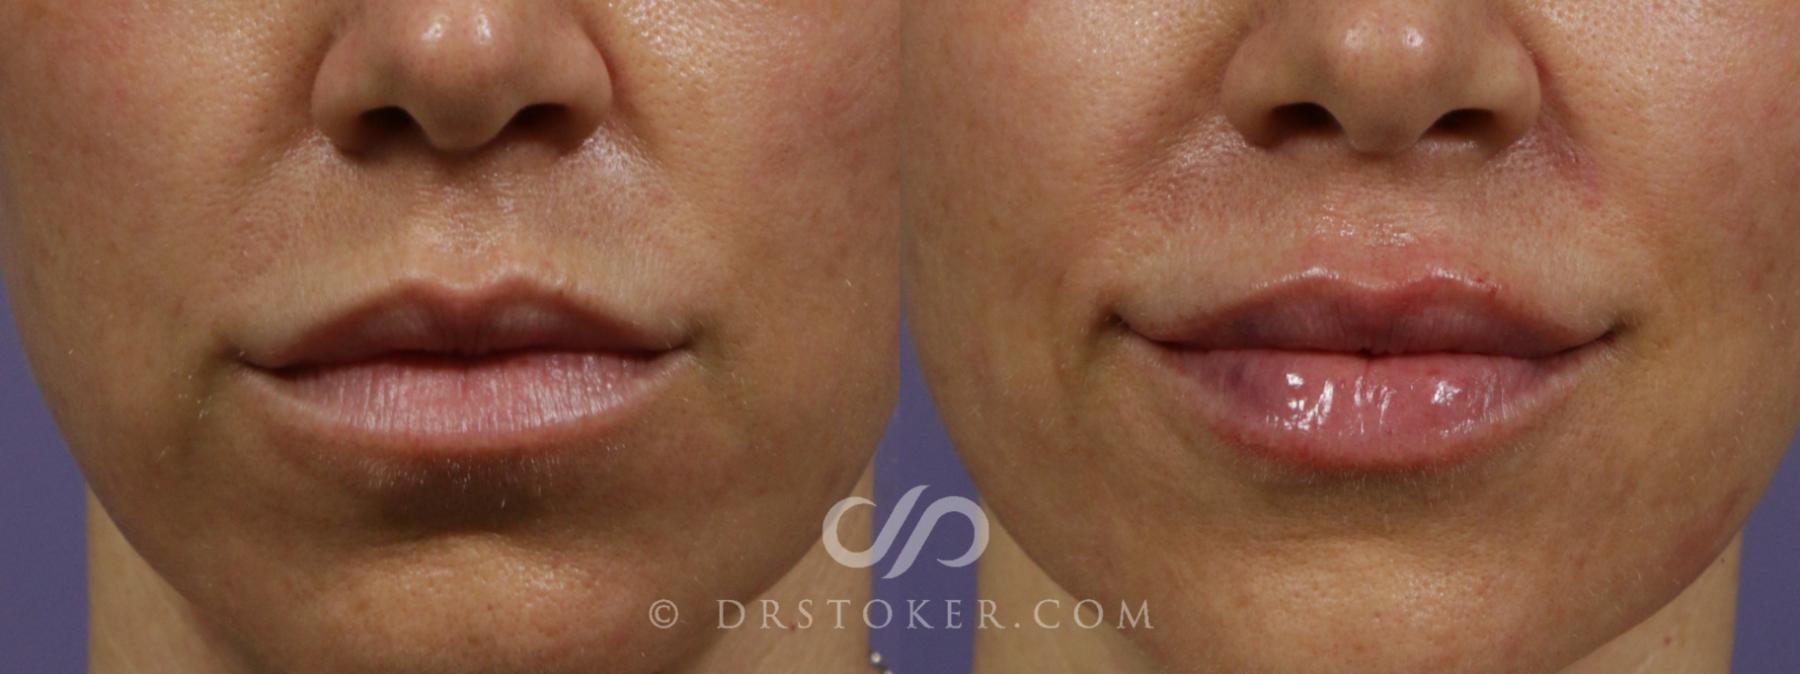 Before & After Lip Fillers/Augmentation Case 2102 Front View in Los Angeles, CA